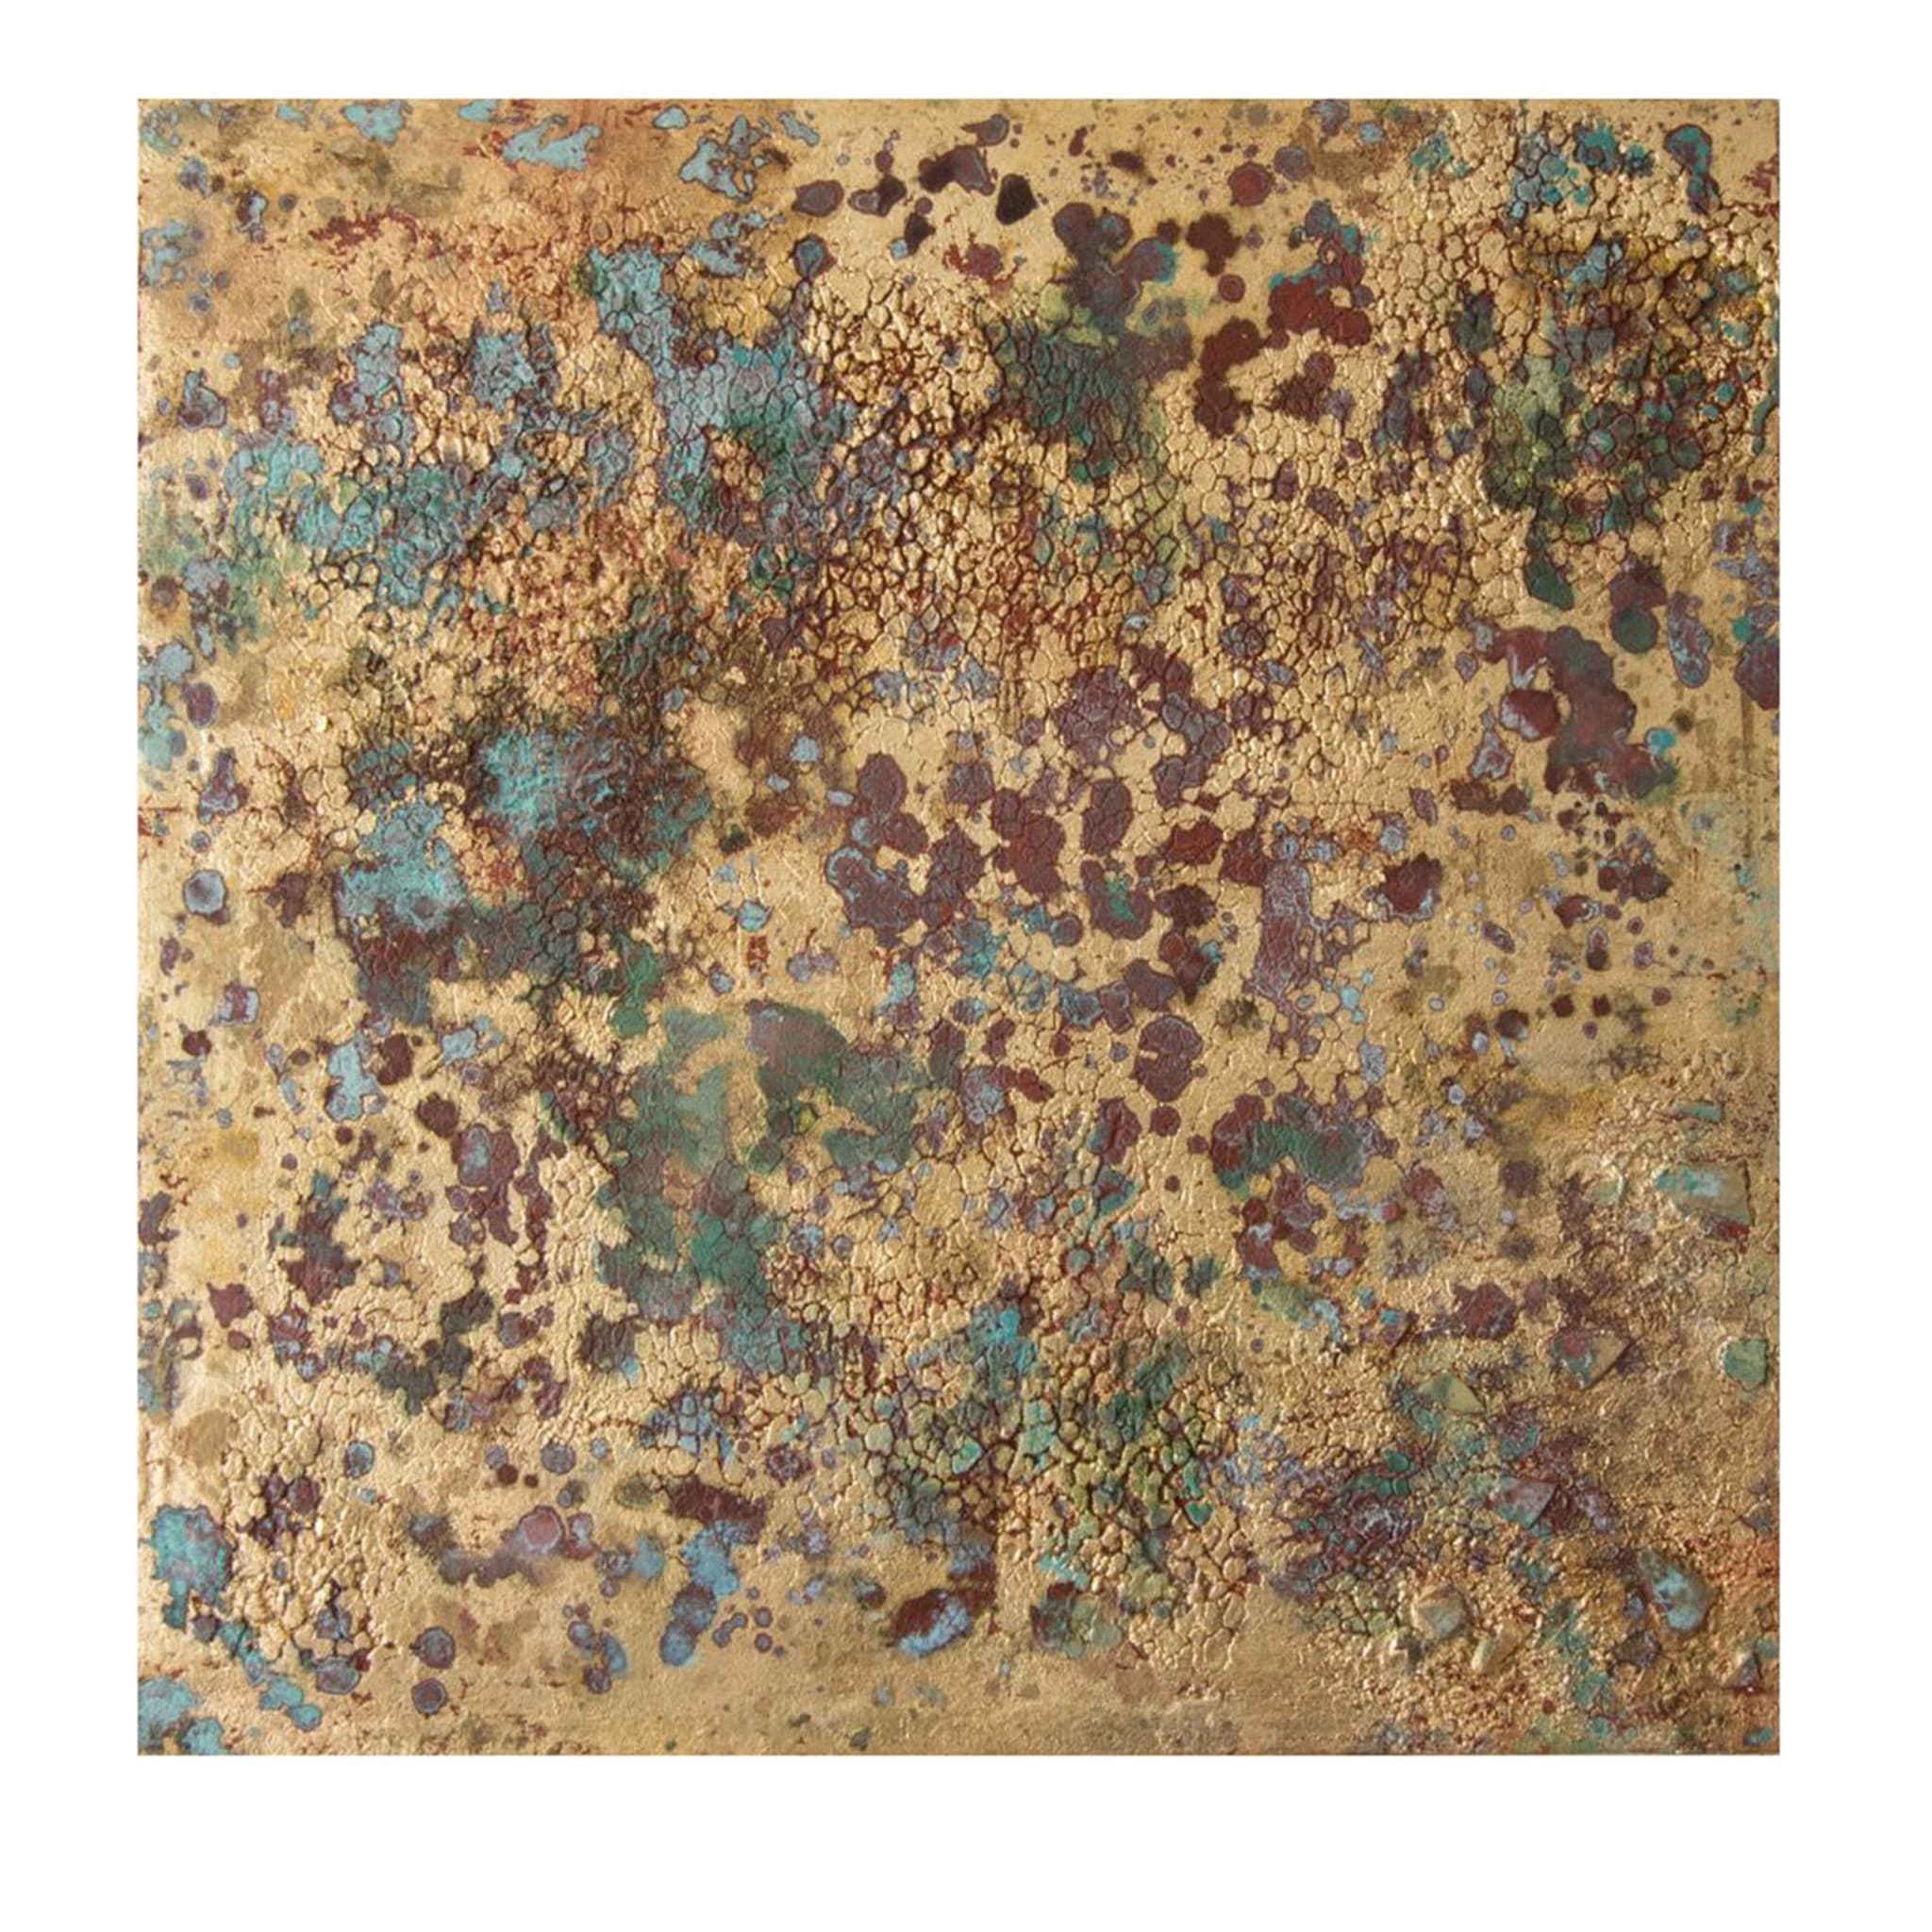 Oxidation 2 Painting - Main view